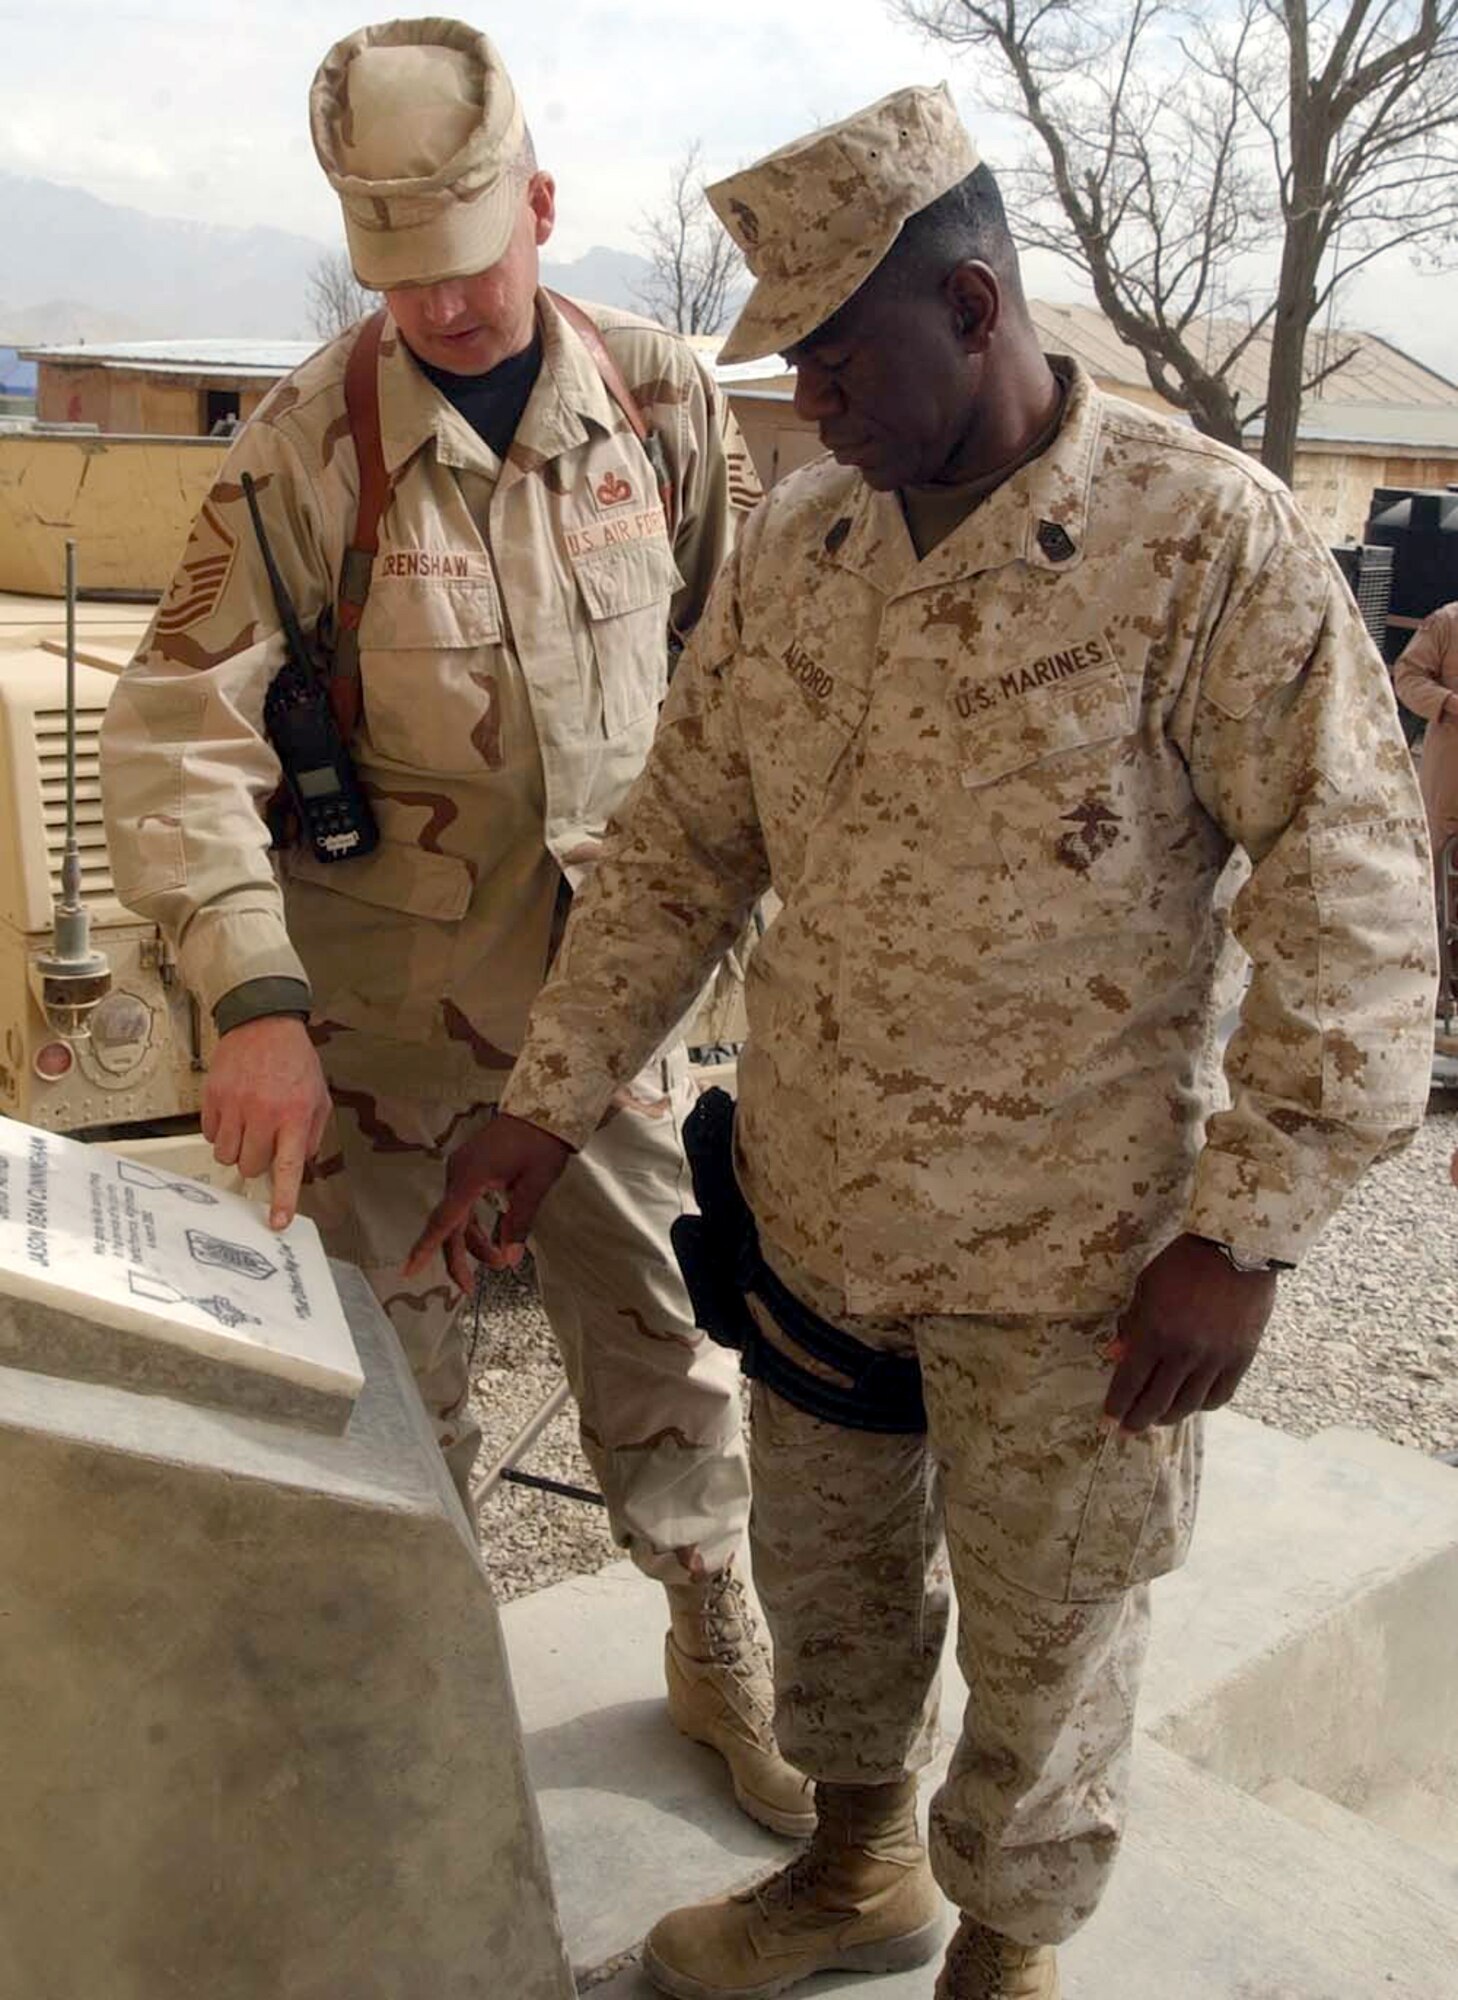 BAGRAM AIR BASE, Afghanistan -- Master Sgt. Taylor Crenshaw and Marine Sgt. Maj. Jerome Alford take a moment to reflect on the life of Senior Airman Jason. D. Cunningham at a monument dedicated to him.  Airman Cunningham was a pararescueman killed in action during Operation Enduring Freedom.  Sergeant Crenshaw is the first sergeant of the 455th Expeditionary Operations Group.  (U.S. Air Force photo by Master Sgt. Jeff Szczechowski)